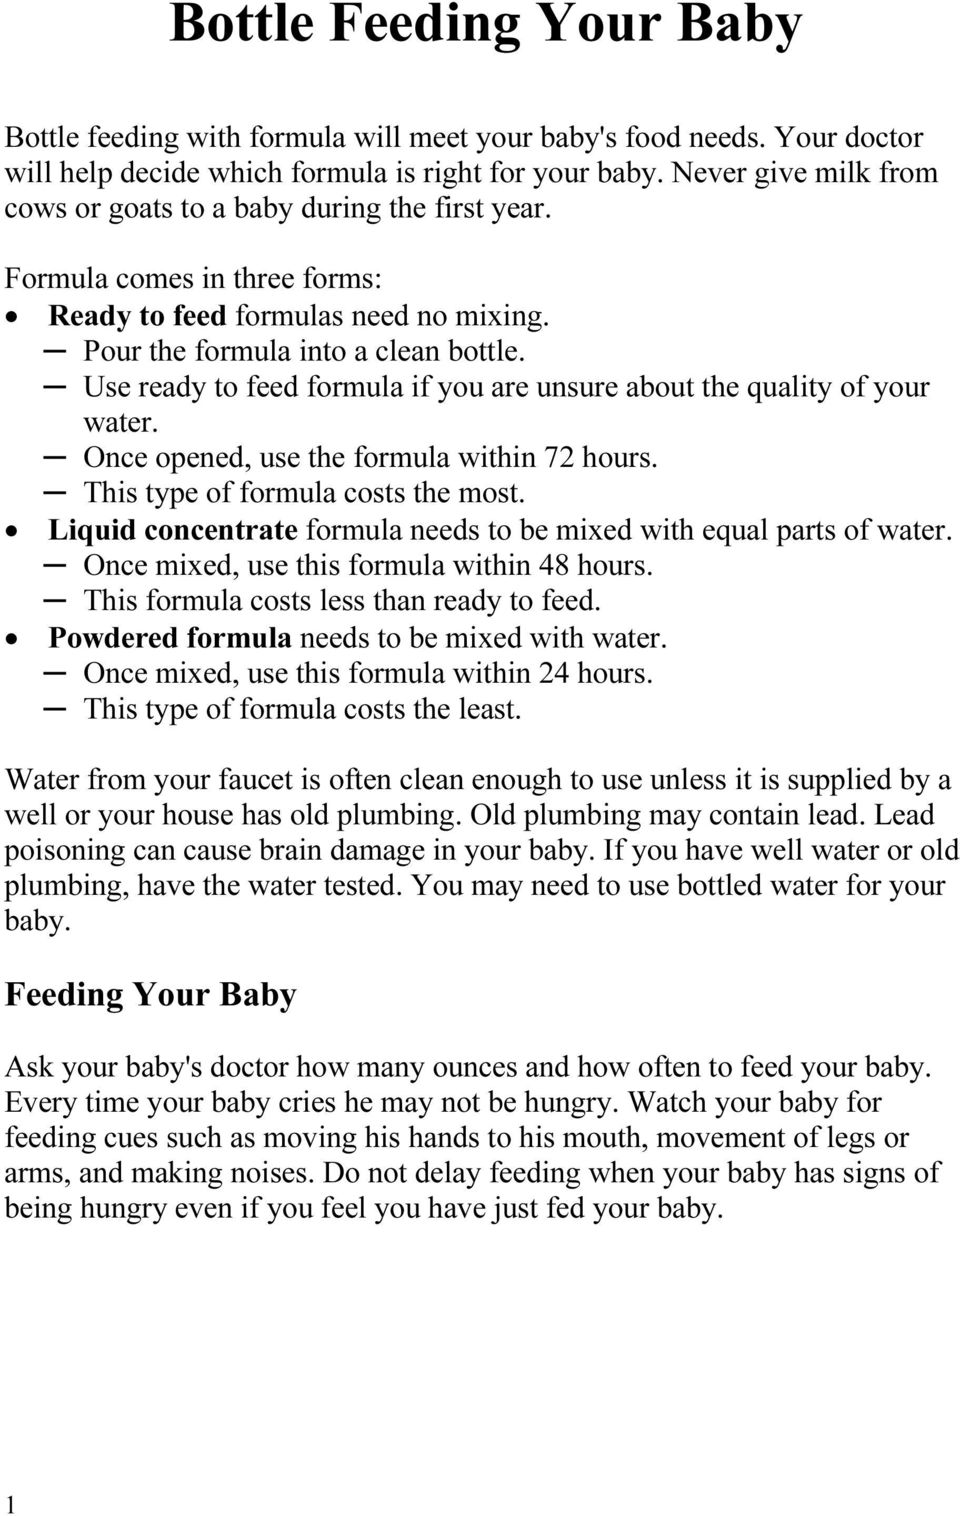 Use ready to feed formula if you are unsure about the quality of your water. Once opened, use the formula within 72 hours. This type of formula costs the most.